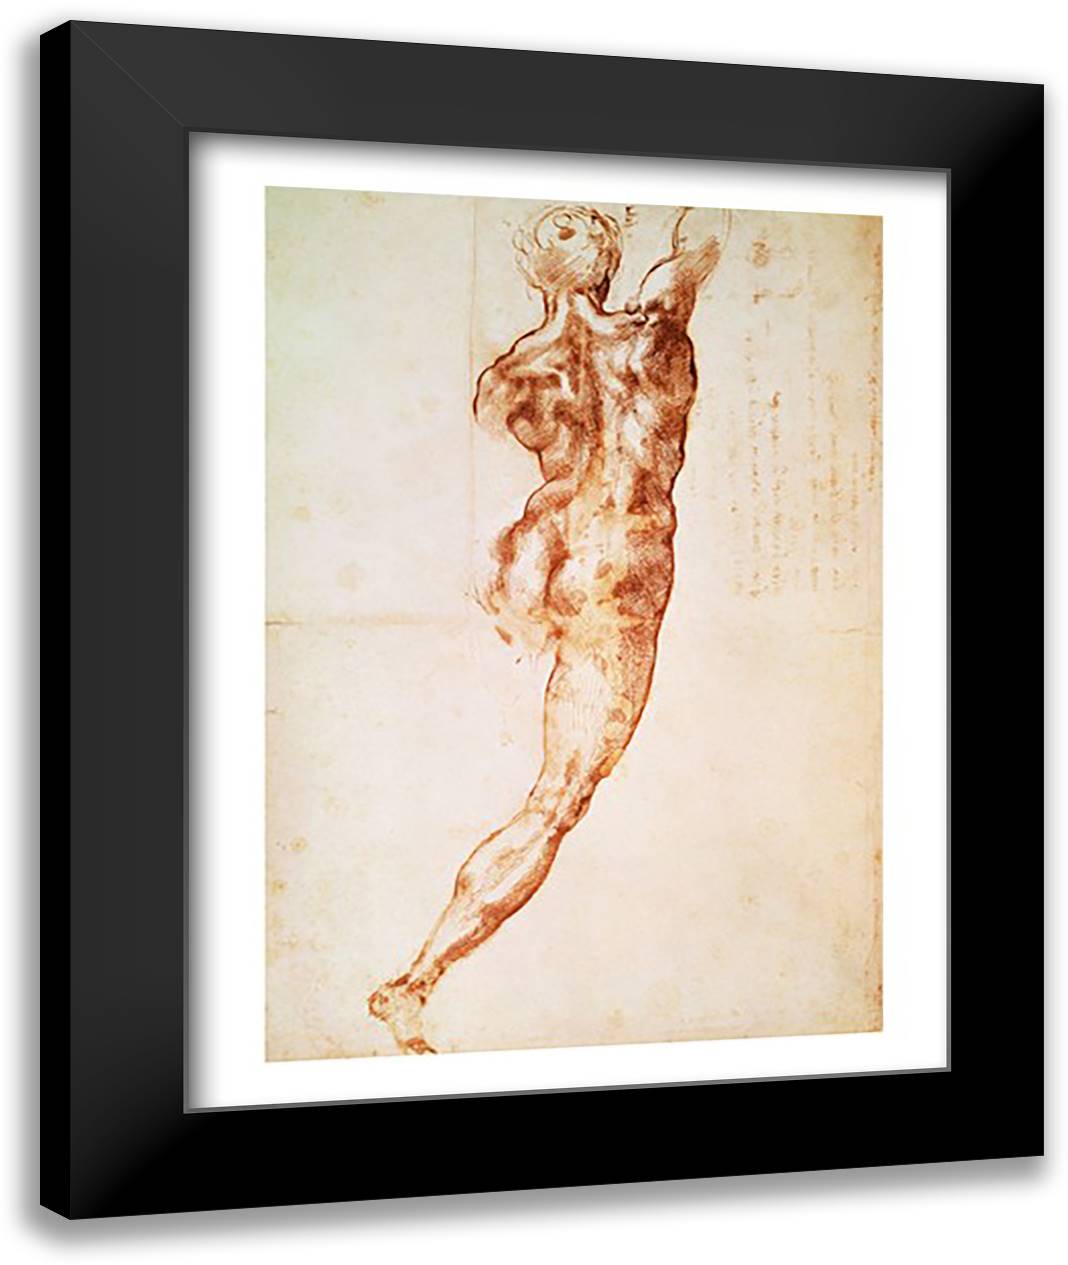 Nude, study for the Battle of Cascina 22x28 Black Modern Wood Framed Art Print Poster by Michelangelo